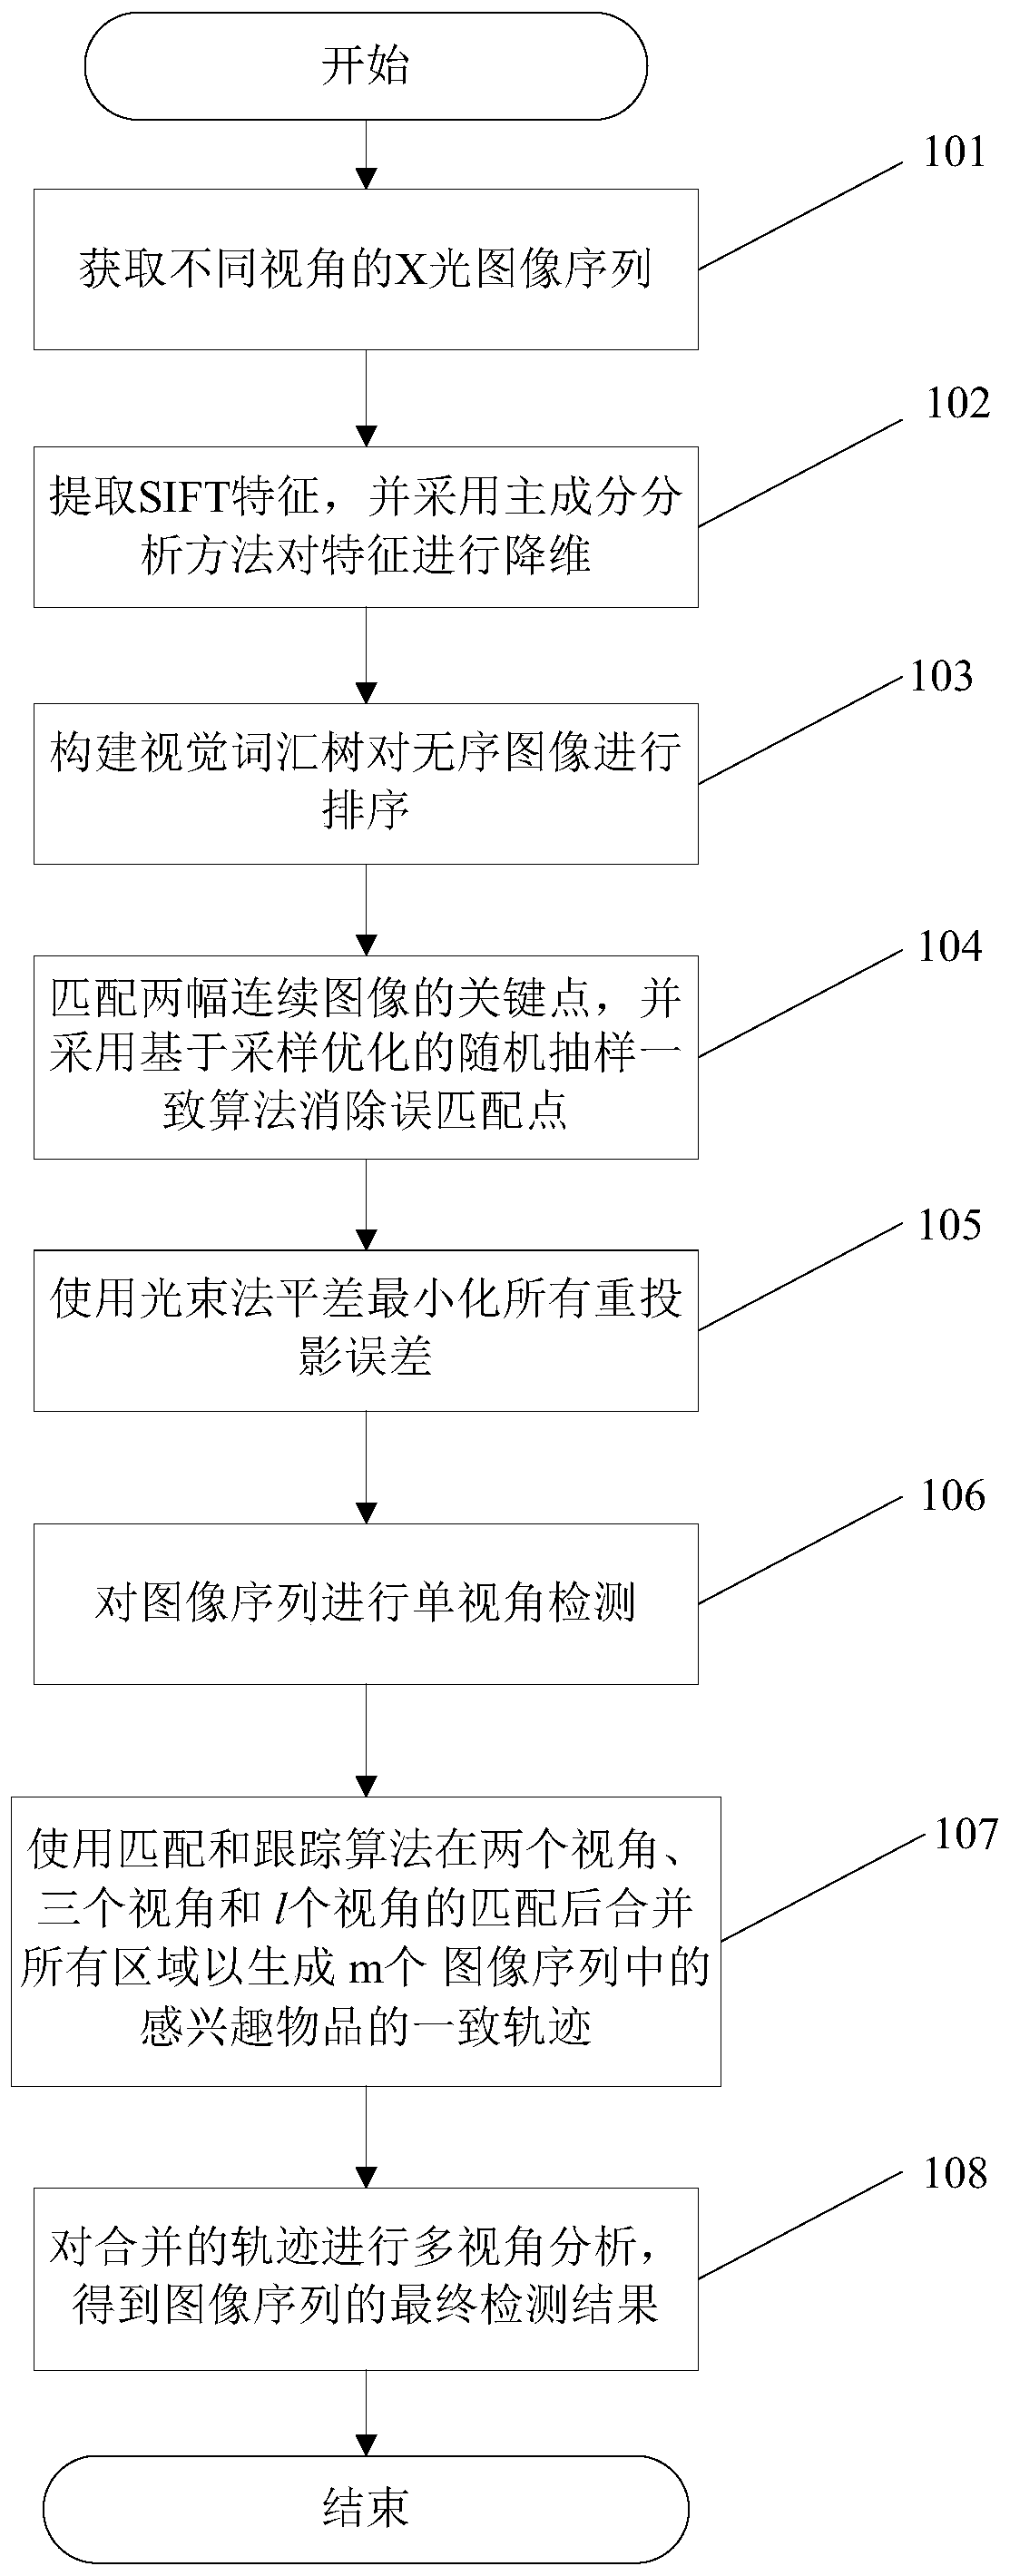 Automatic security inspection method for multi-view matching and tracking